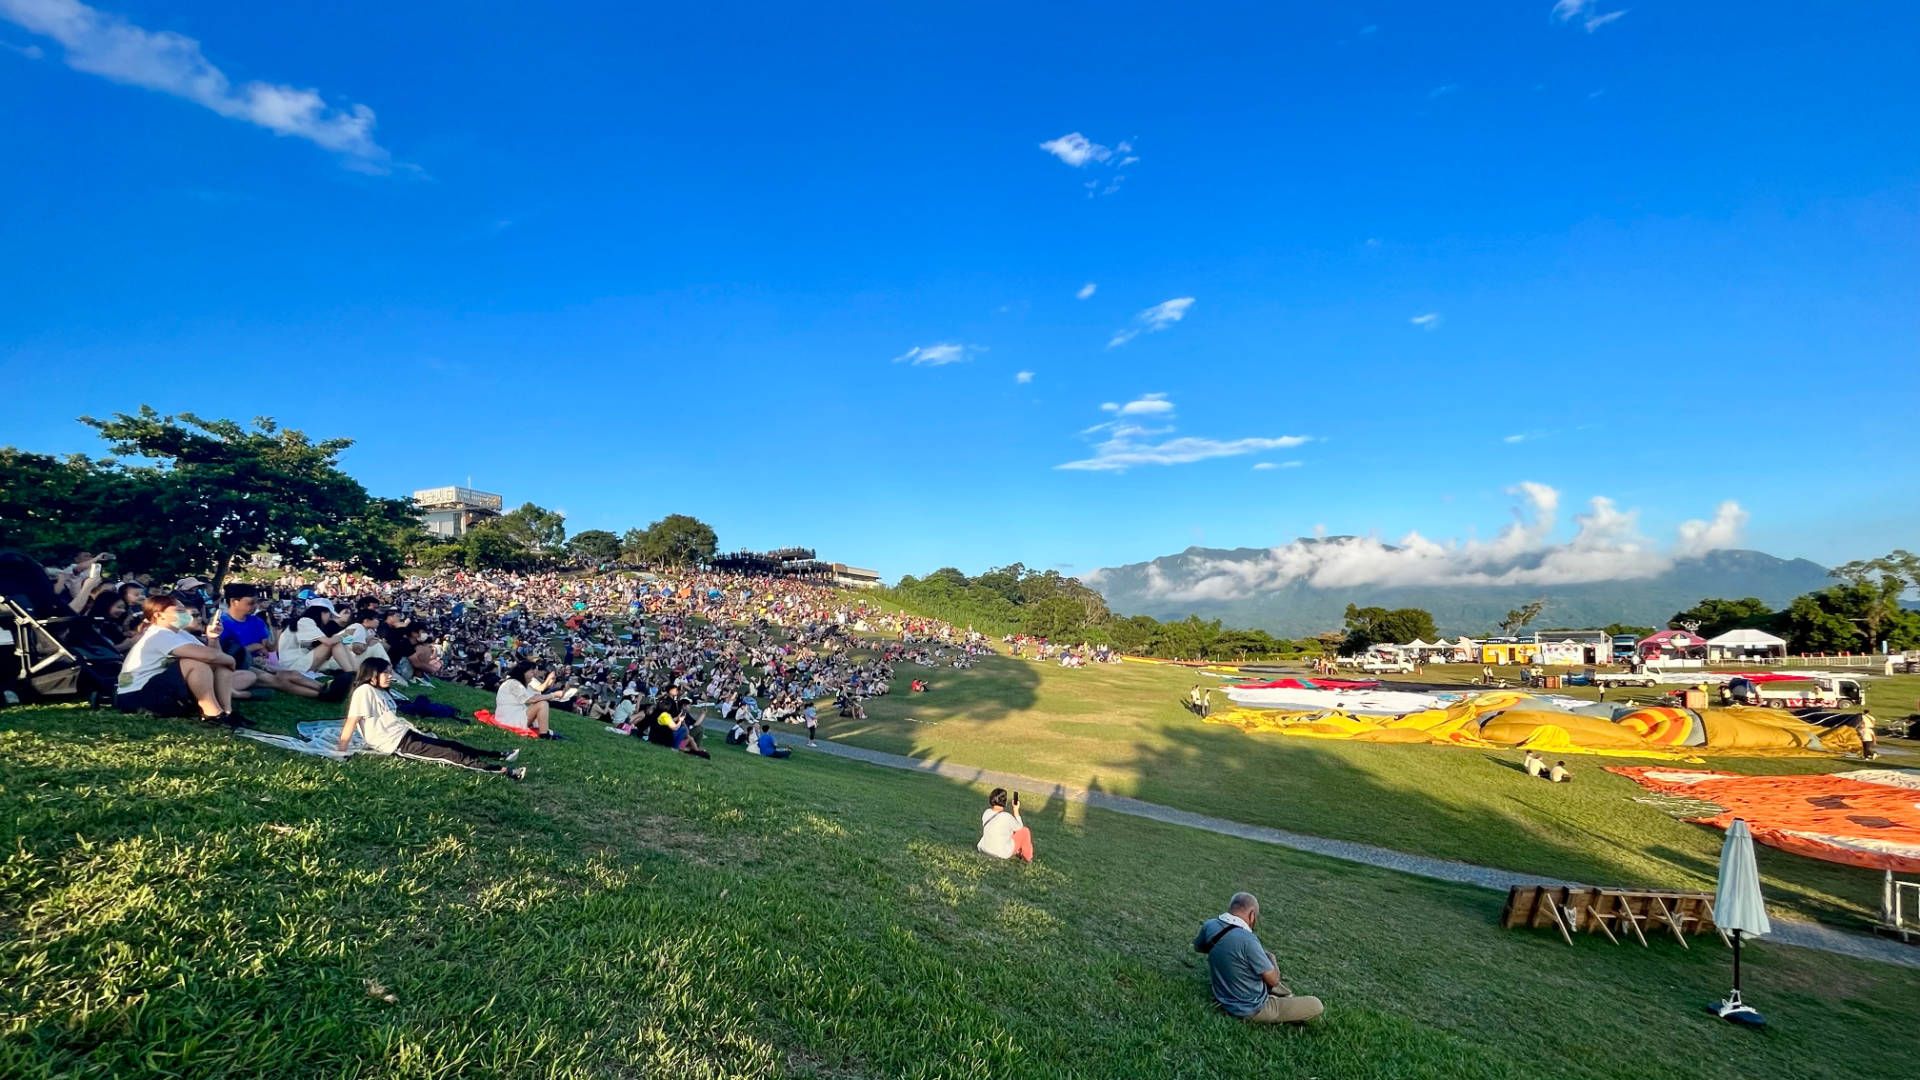 A wide grassy field with a large embankment at one end. A crowd of hundreds of people are sitting on this embankment looking out over a dozen hot air balloons, deflated, and laid out across the grass.